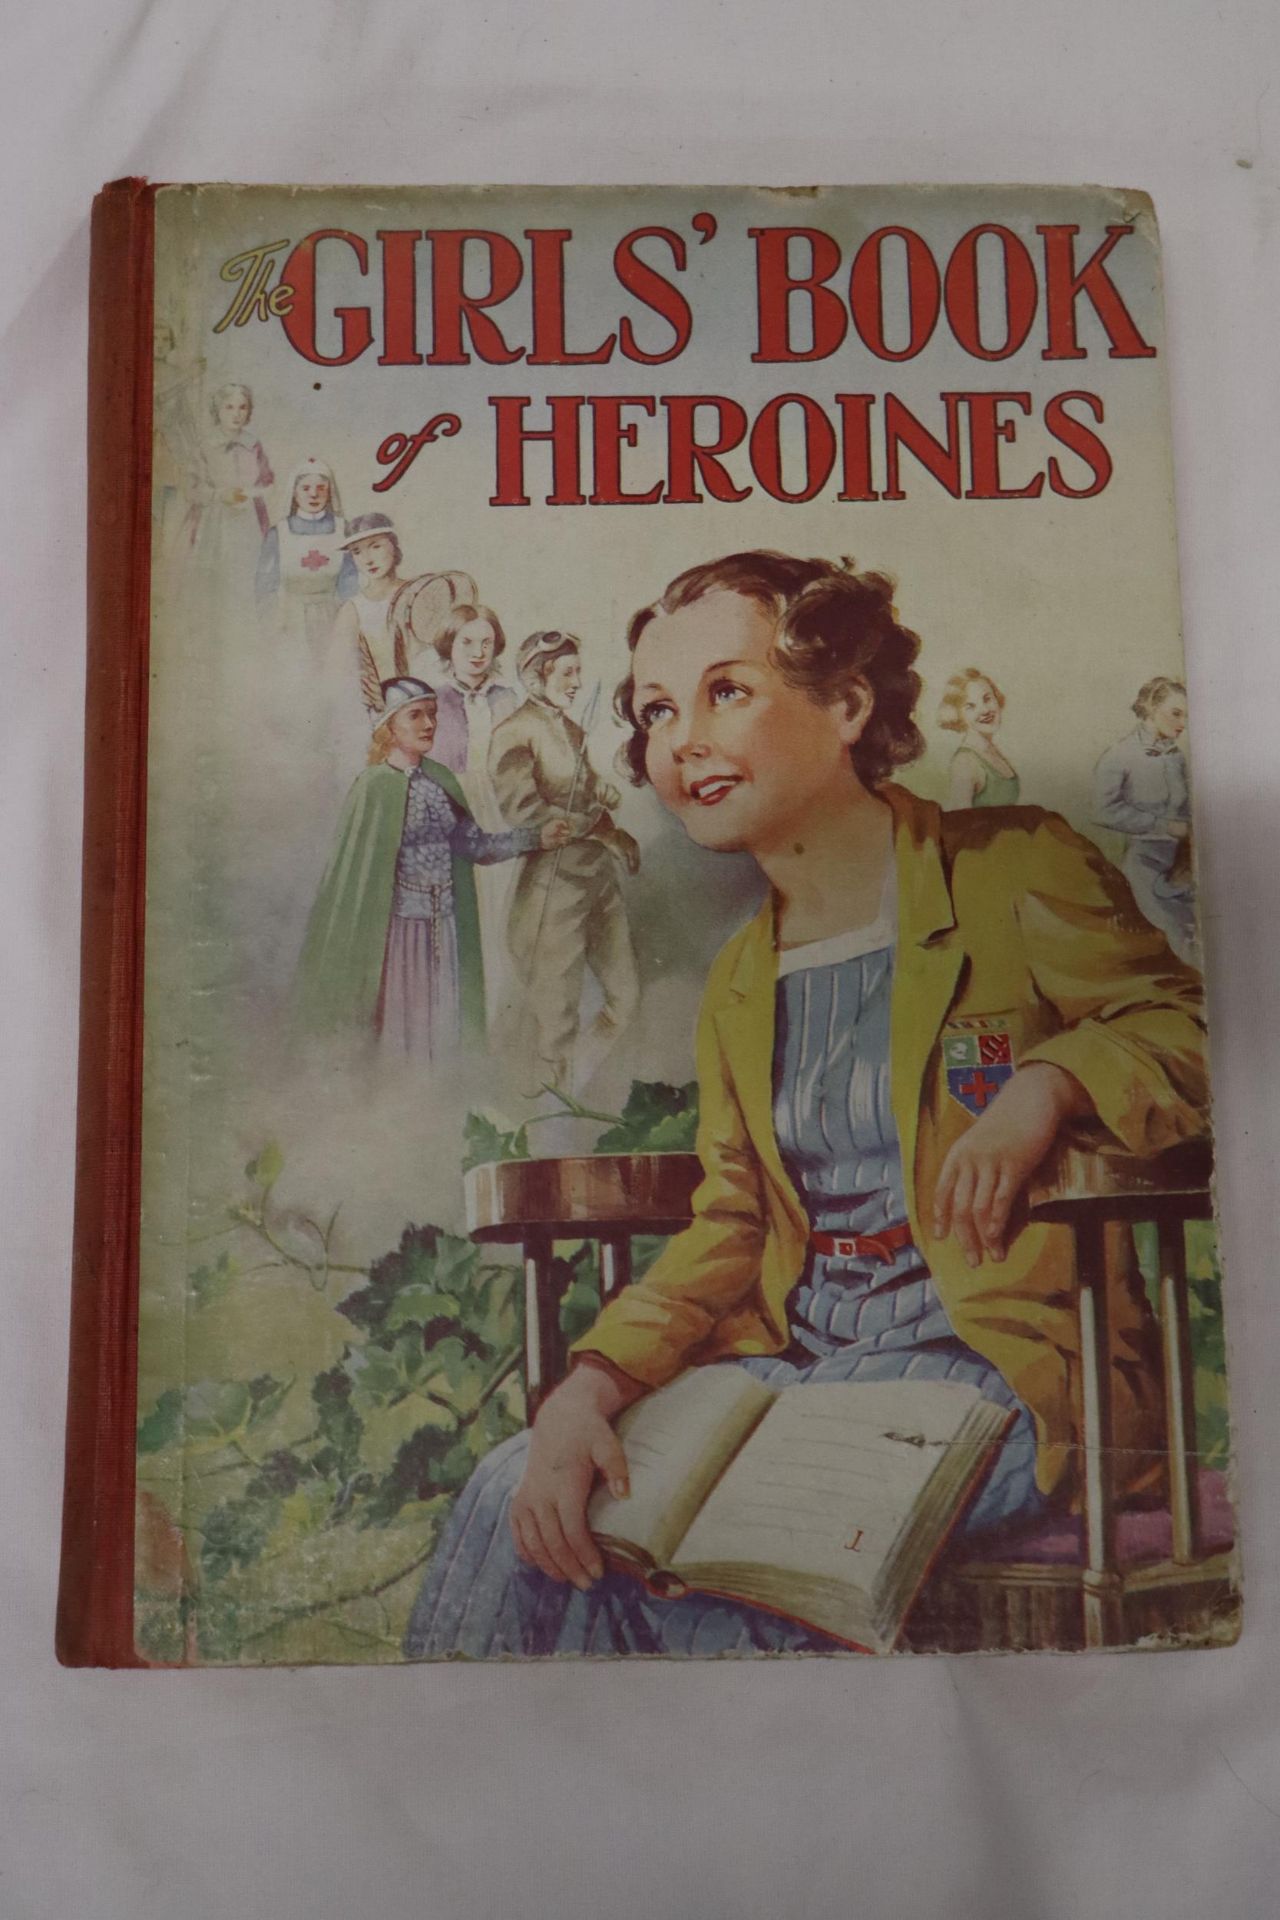 TWO VINTAGE HARDBACK CHILDREN'S BOOKS, 'THE GIRL'S BOOK OF HEROINES' AND 'LAMB'S TALES FROM - Image 5 of 8